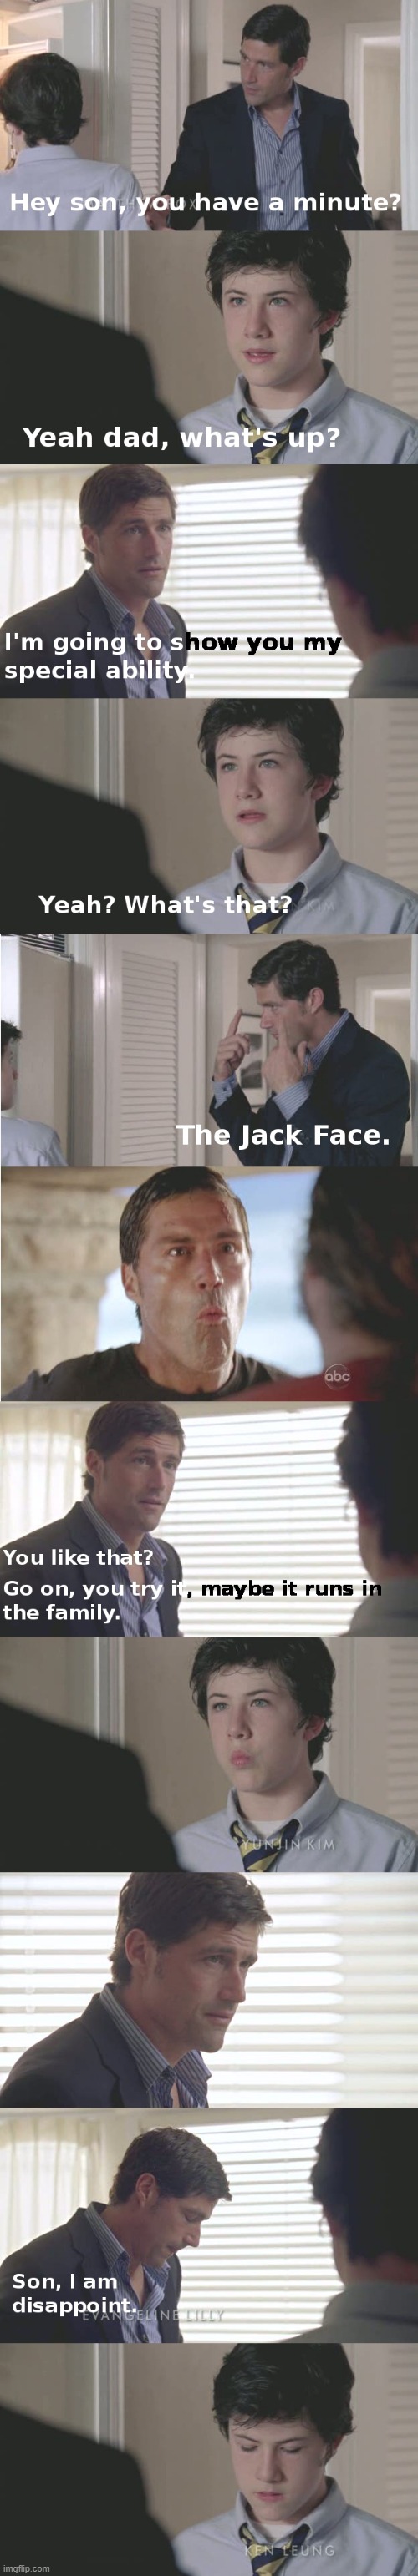 The Jack Face | image tagged in lost,tv show,2000s,father,family | made w/ Imgflip meme maker